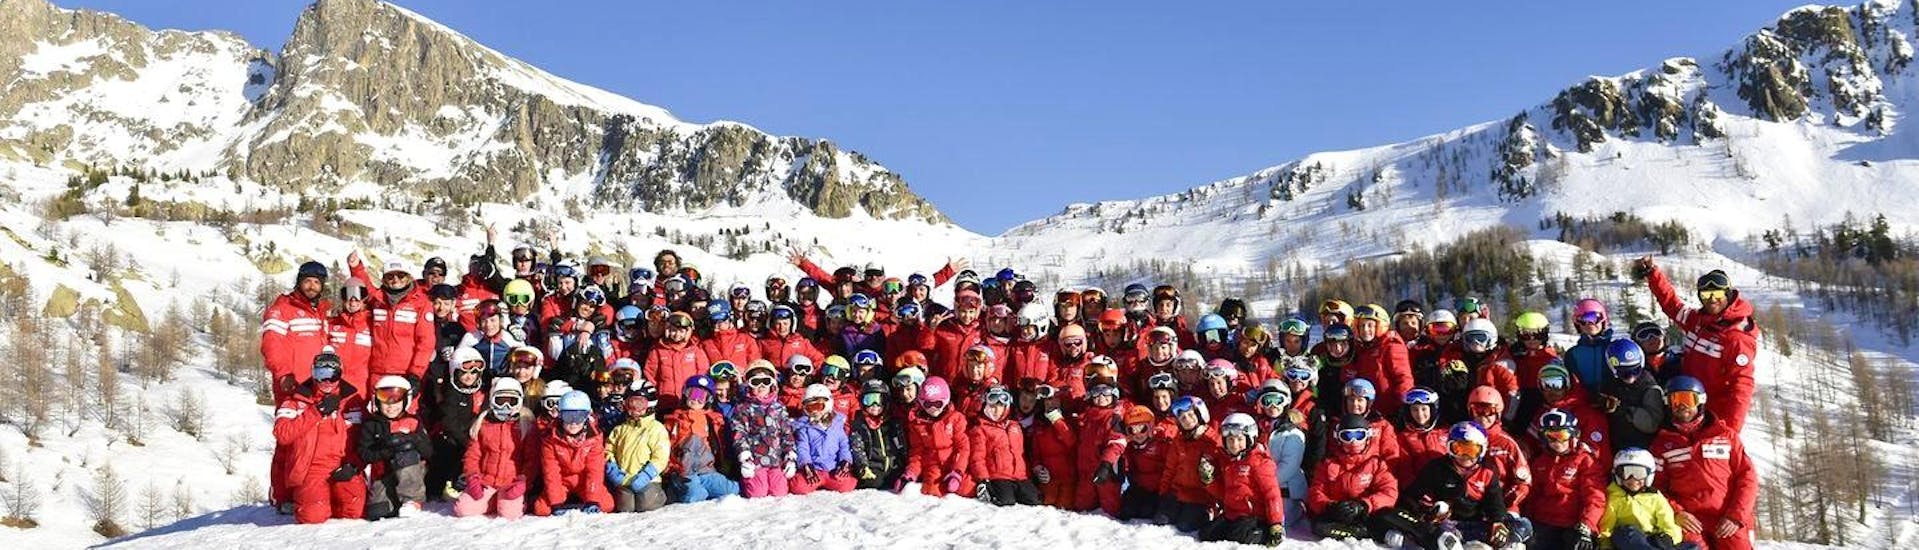 Ski instructors of the ski school ESF Isola 2000 and kids are posing for a group picture before the start of their ski lessons.